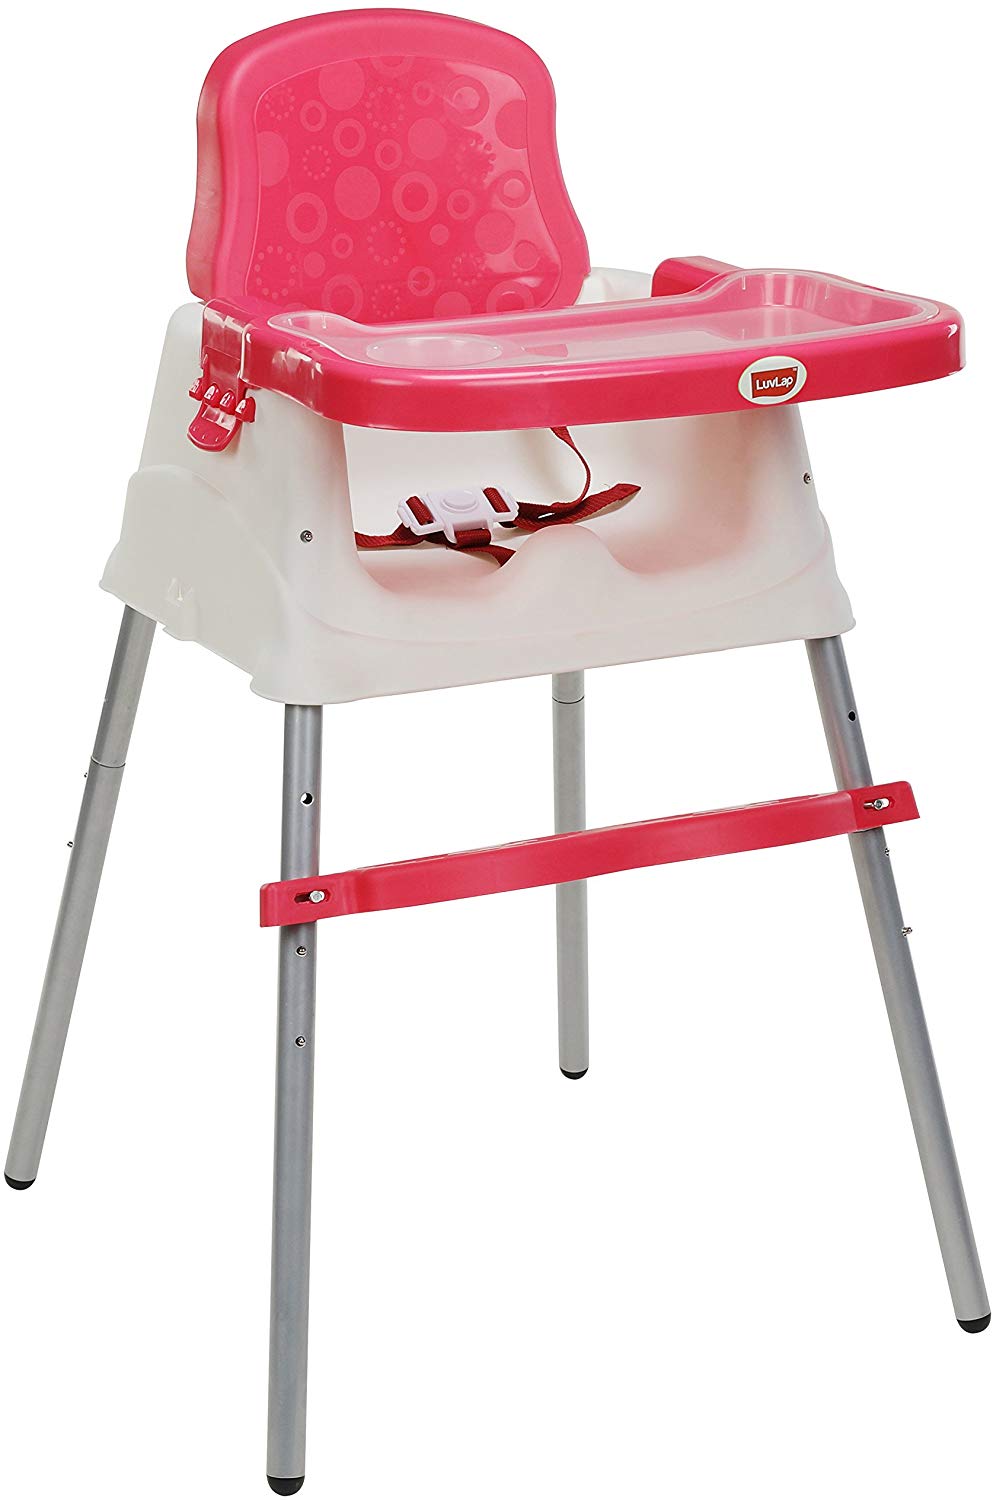 Top 5 Best Baby High Chair